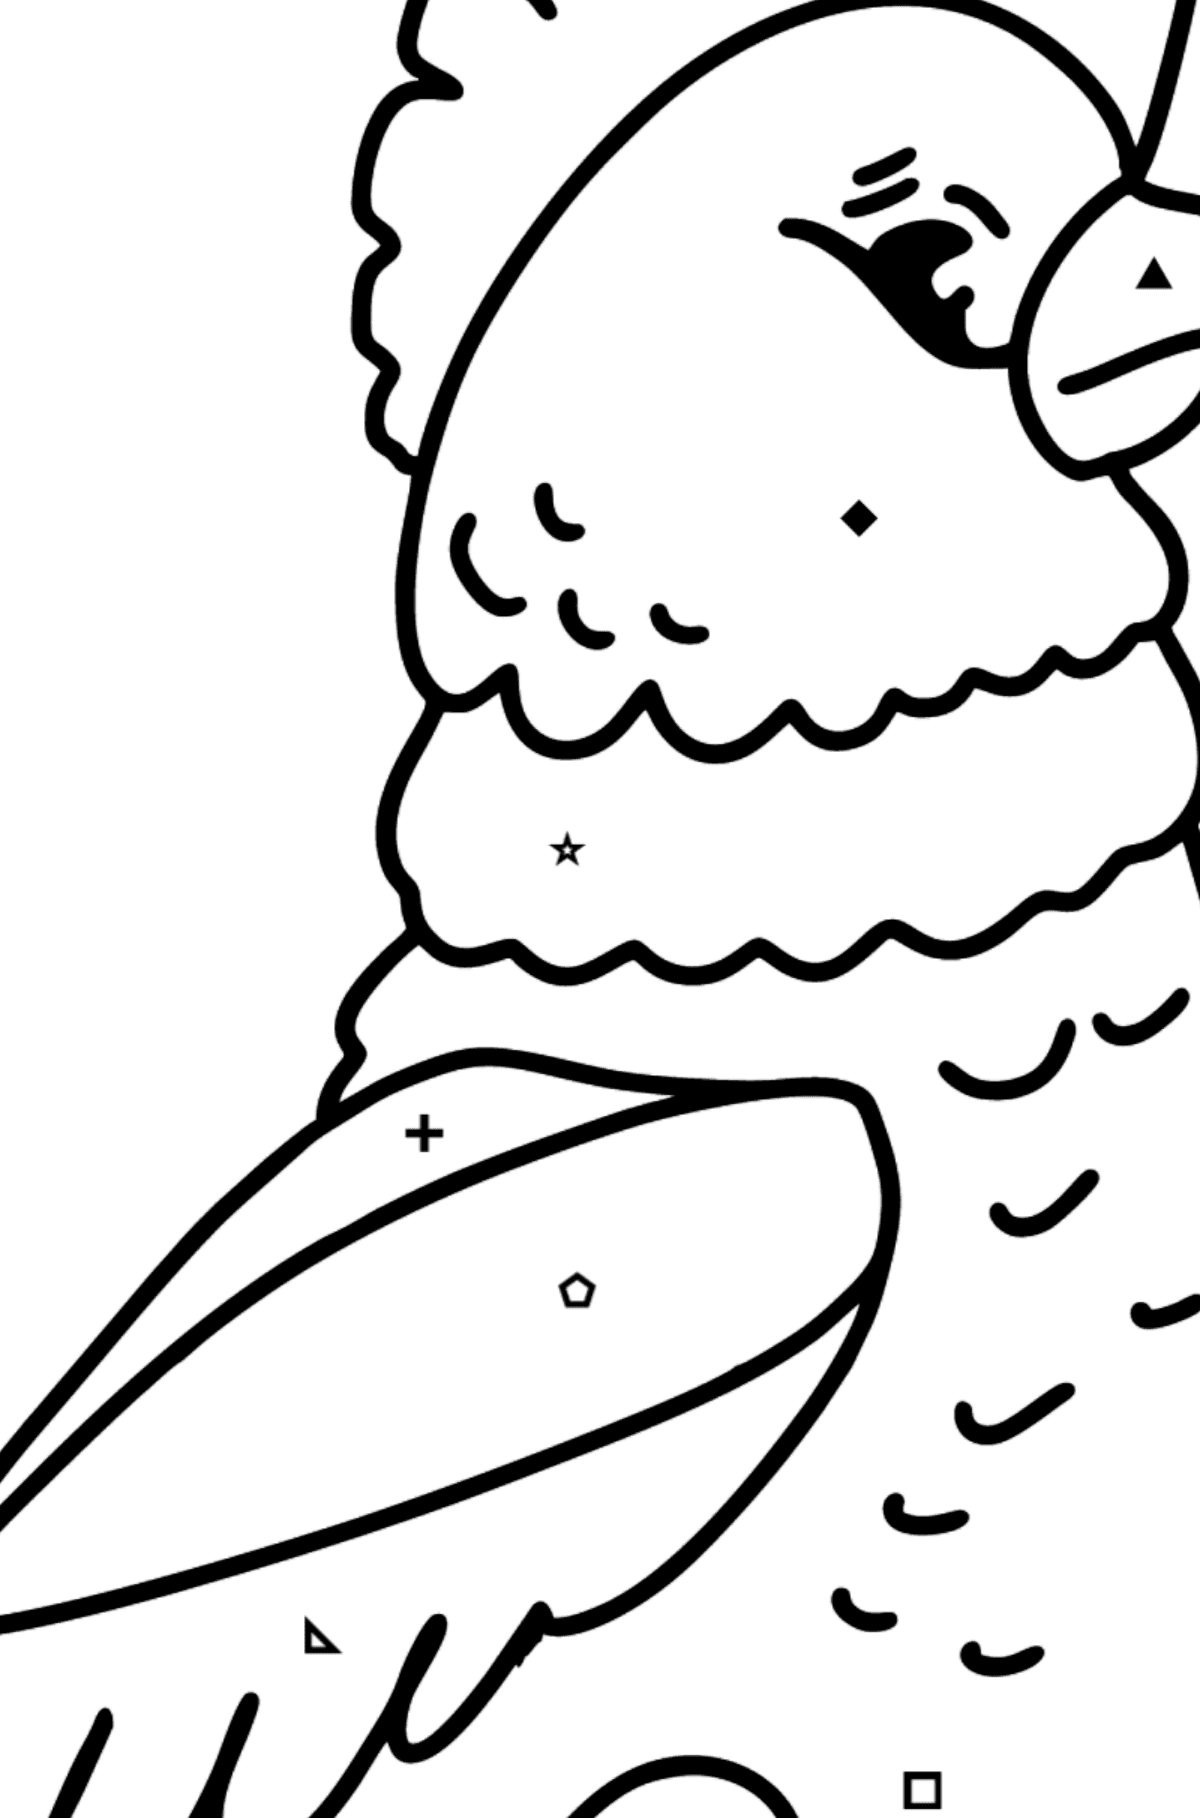 Cockatoo coloring page - Coloring by Symbols and Geometric Shapes for Kids